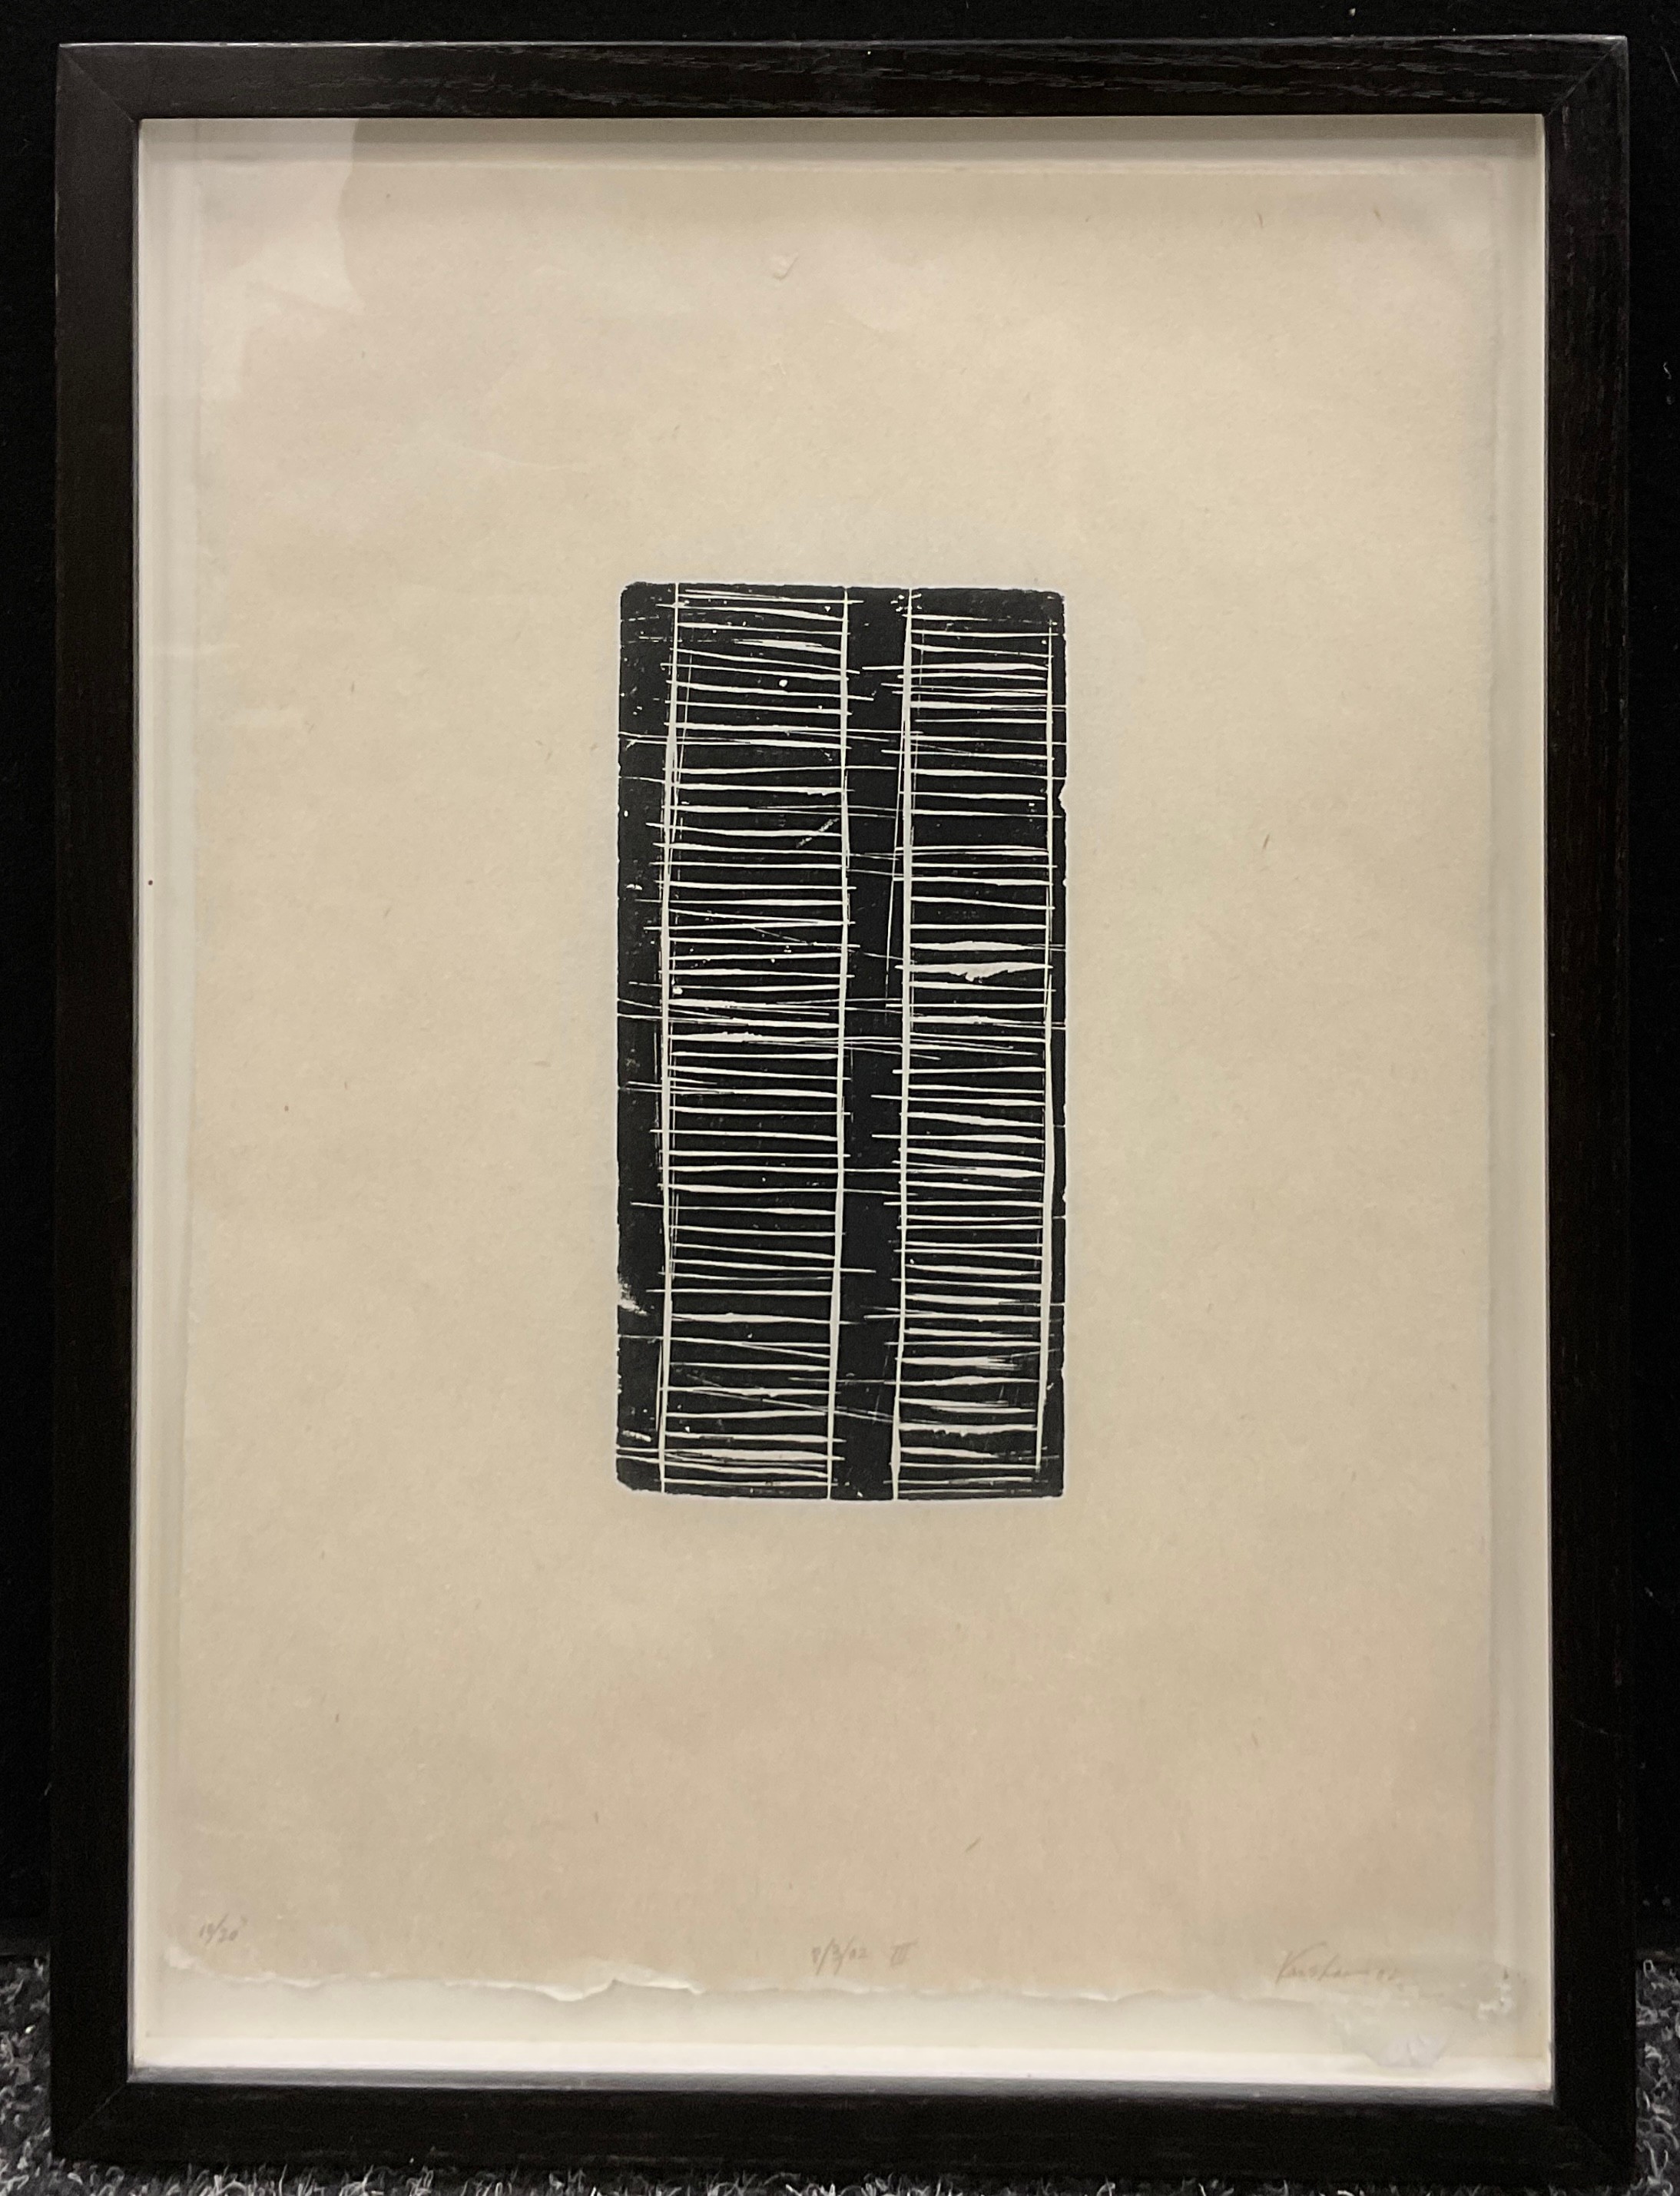 Linda Karshan, by and after, '8/3/02 III', signed in pencil, numbered 10/20, 35.5cm x 25cm